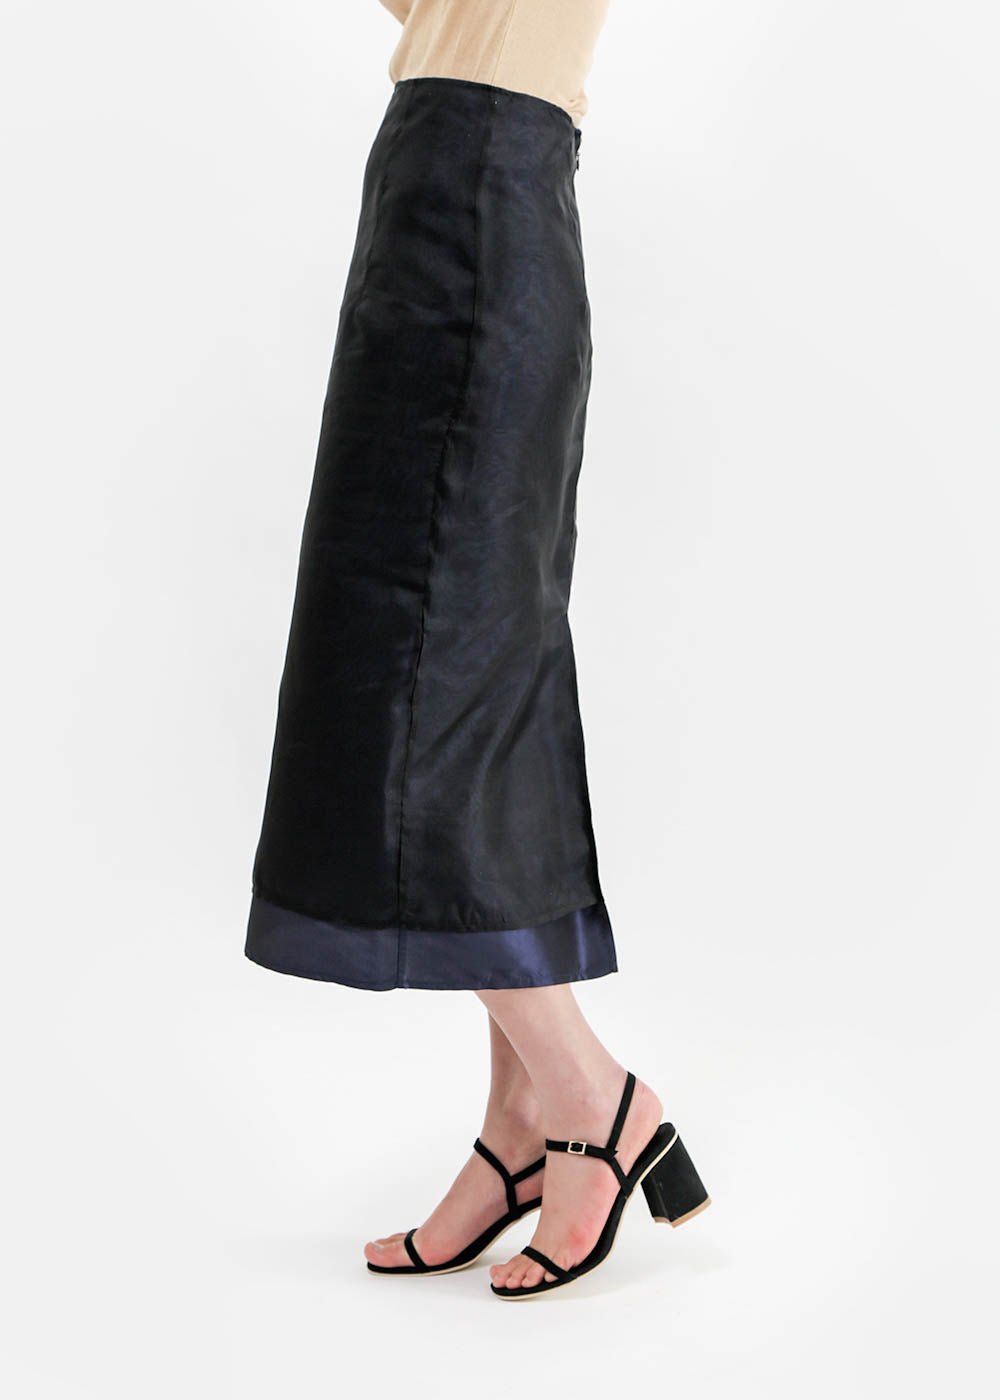 Suzanne Rae Double Layer A-Line Skirt - New Classics Studios Sustainable Ethical Fashion Canada